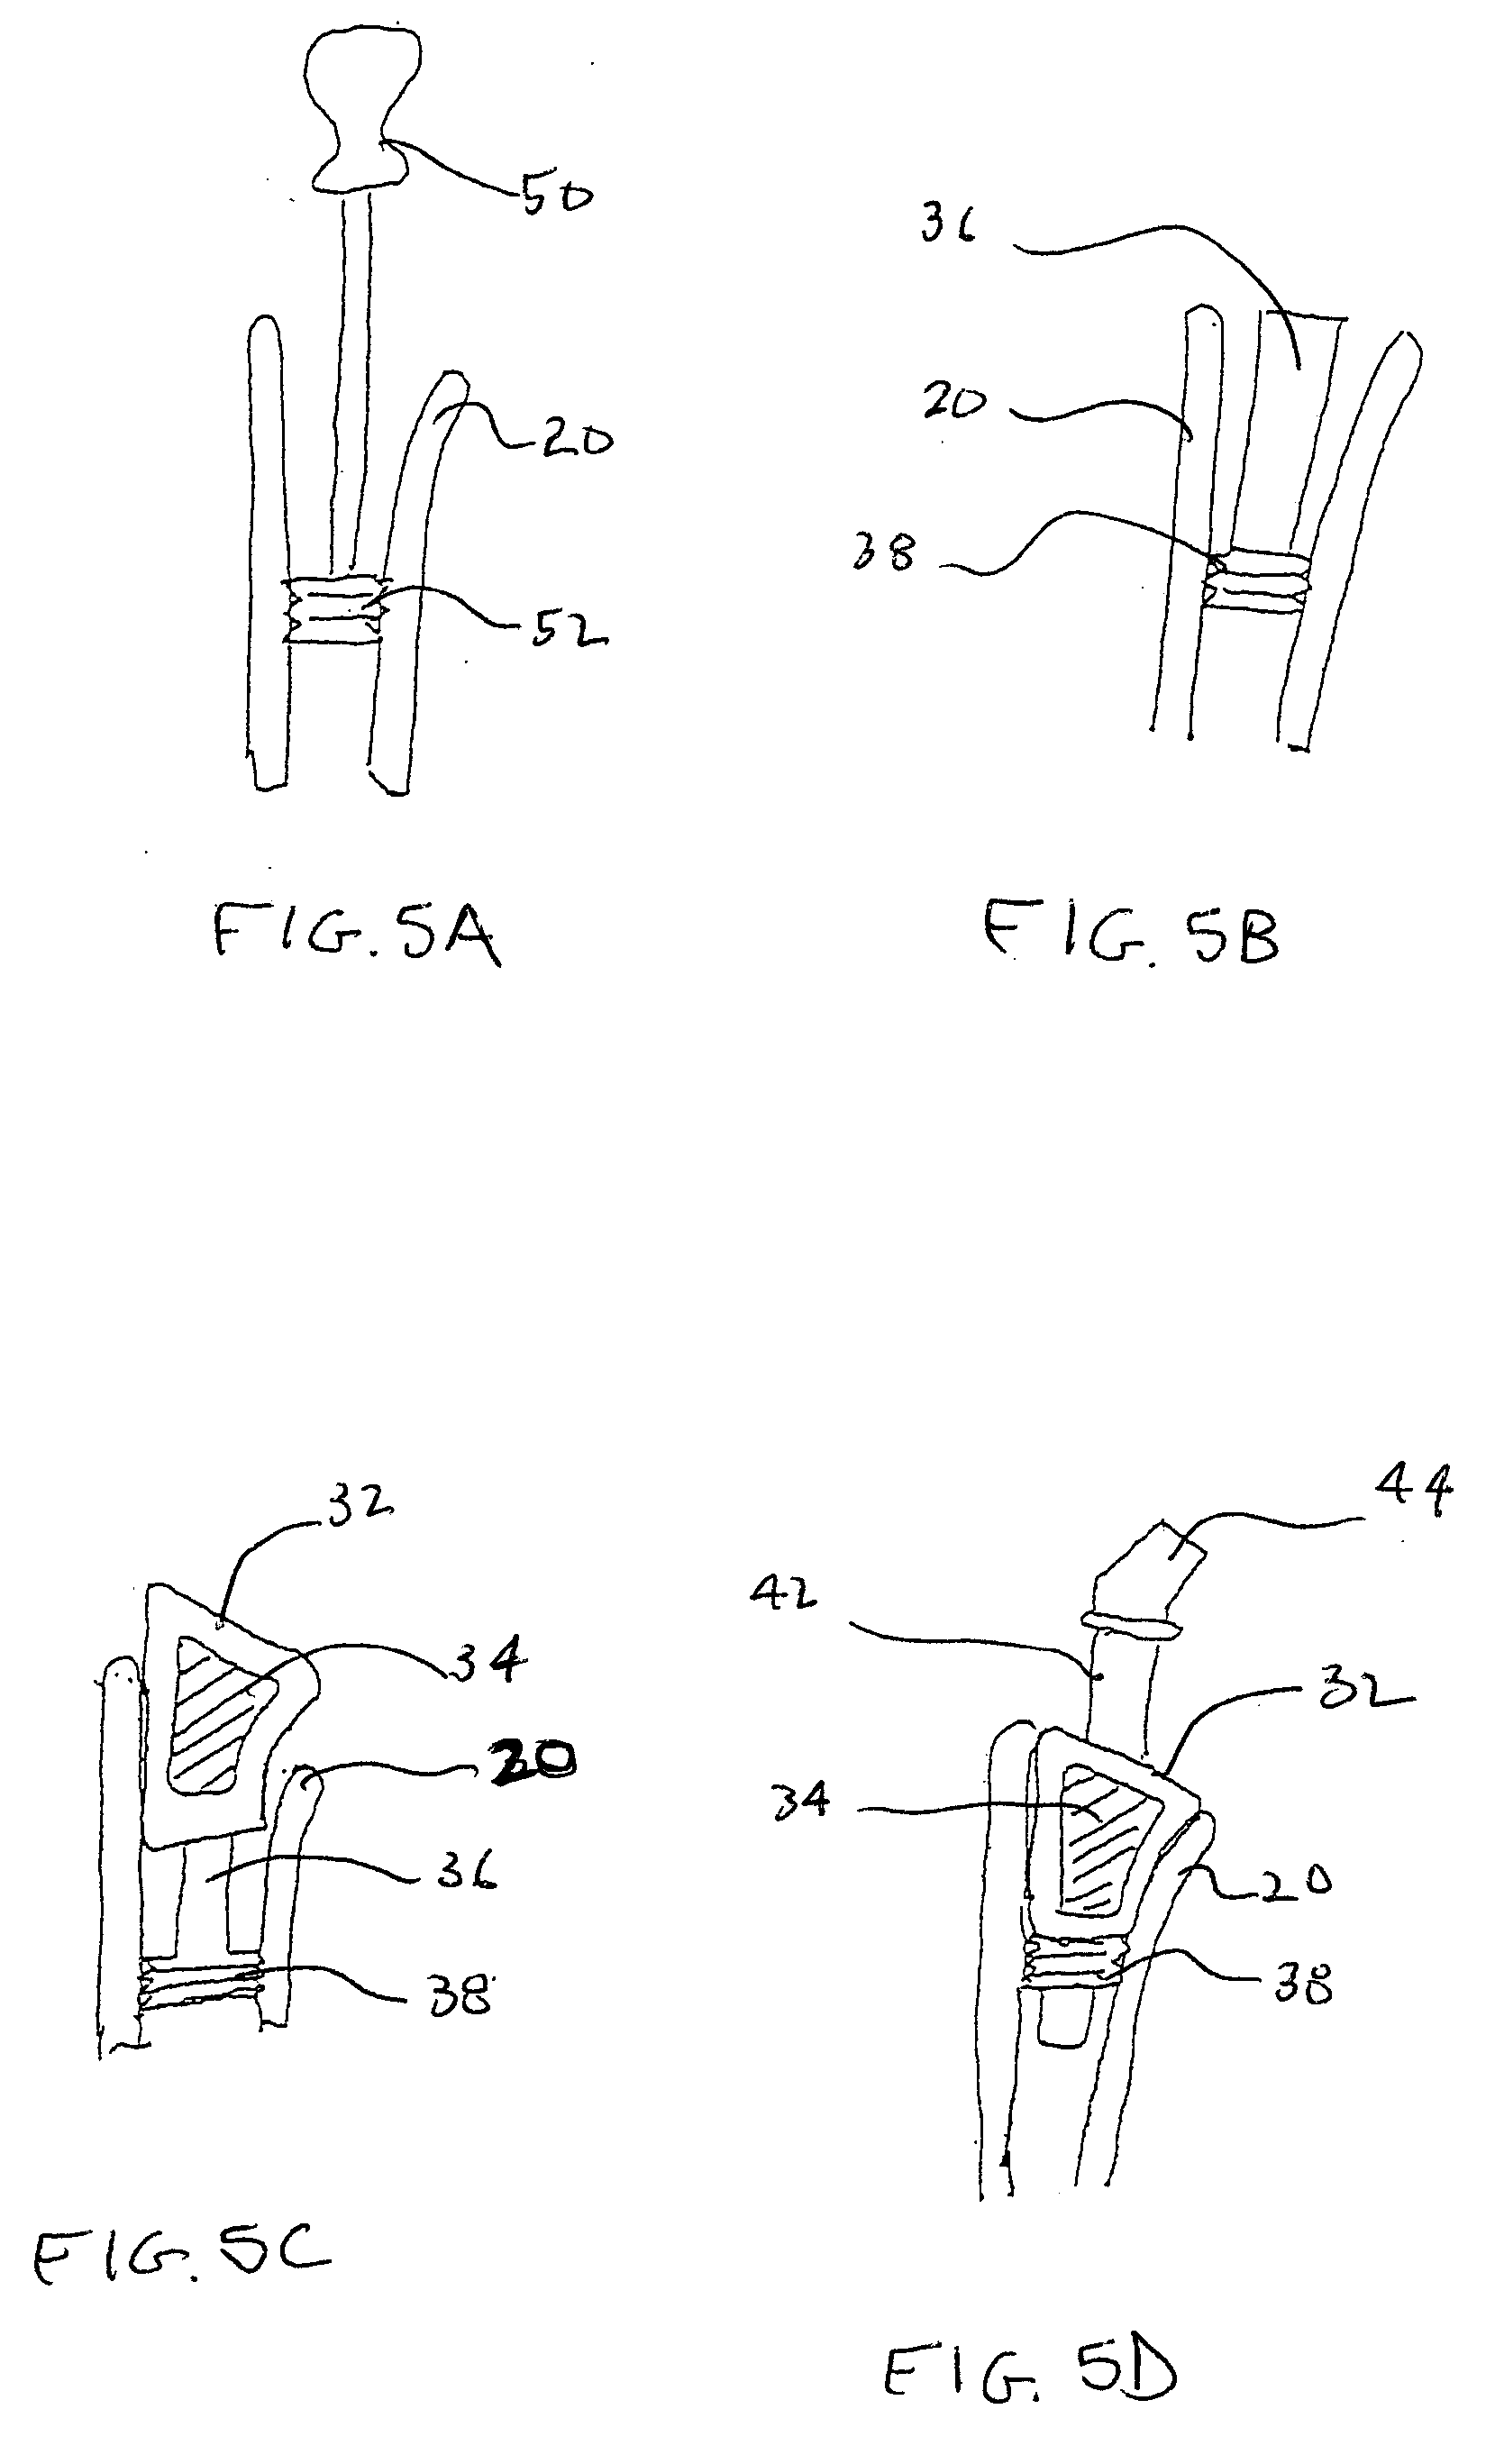 Arthroplasty and fixation devices with threaded intramedullary component